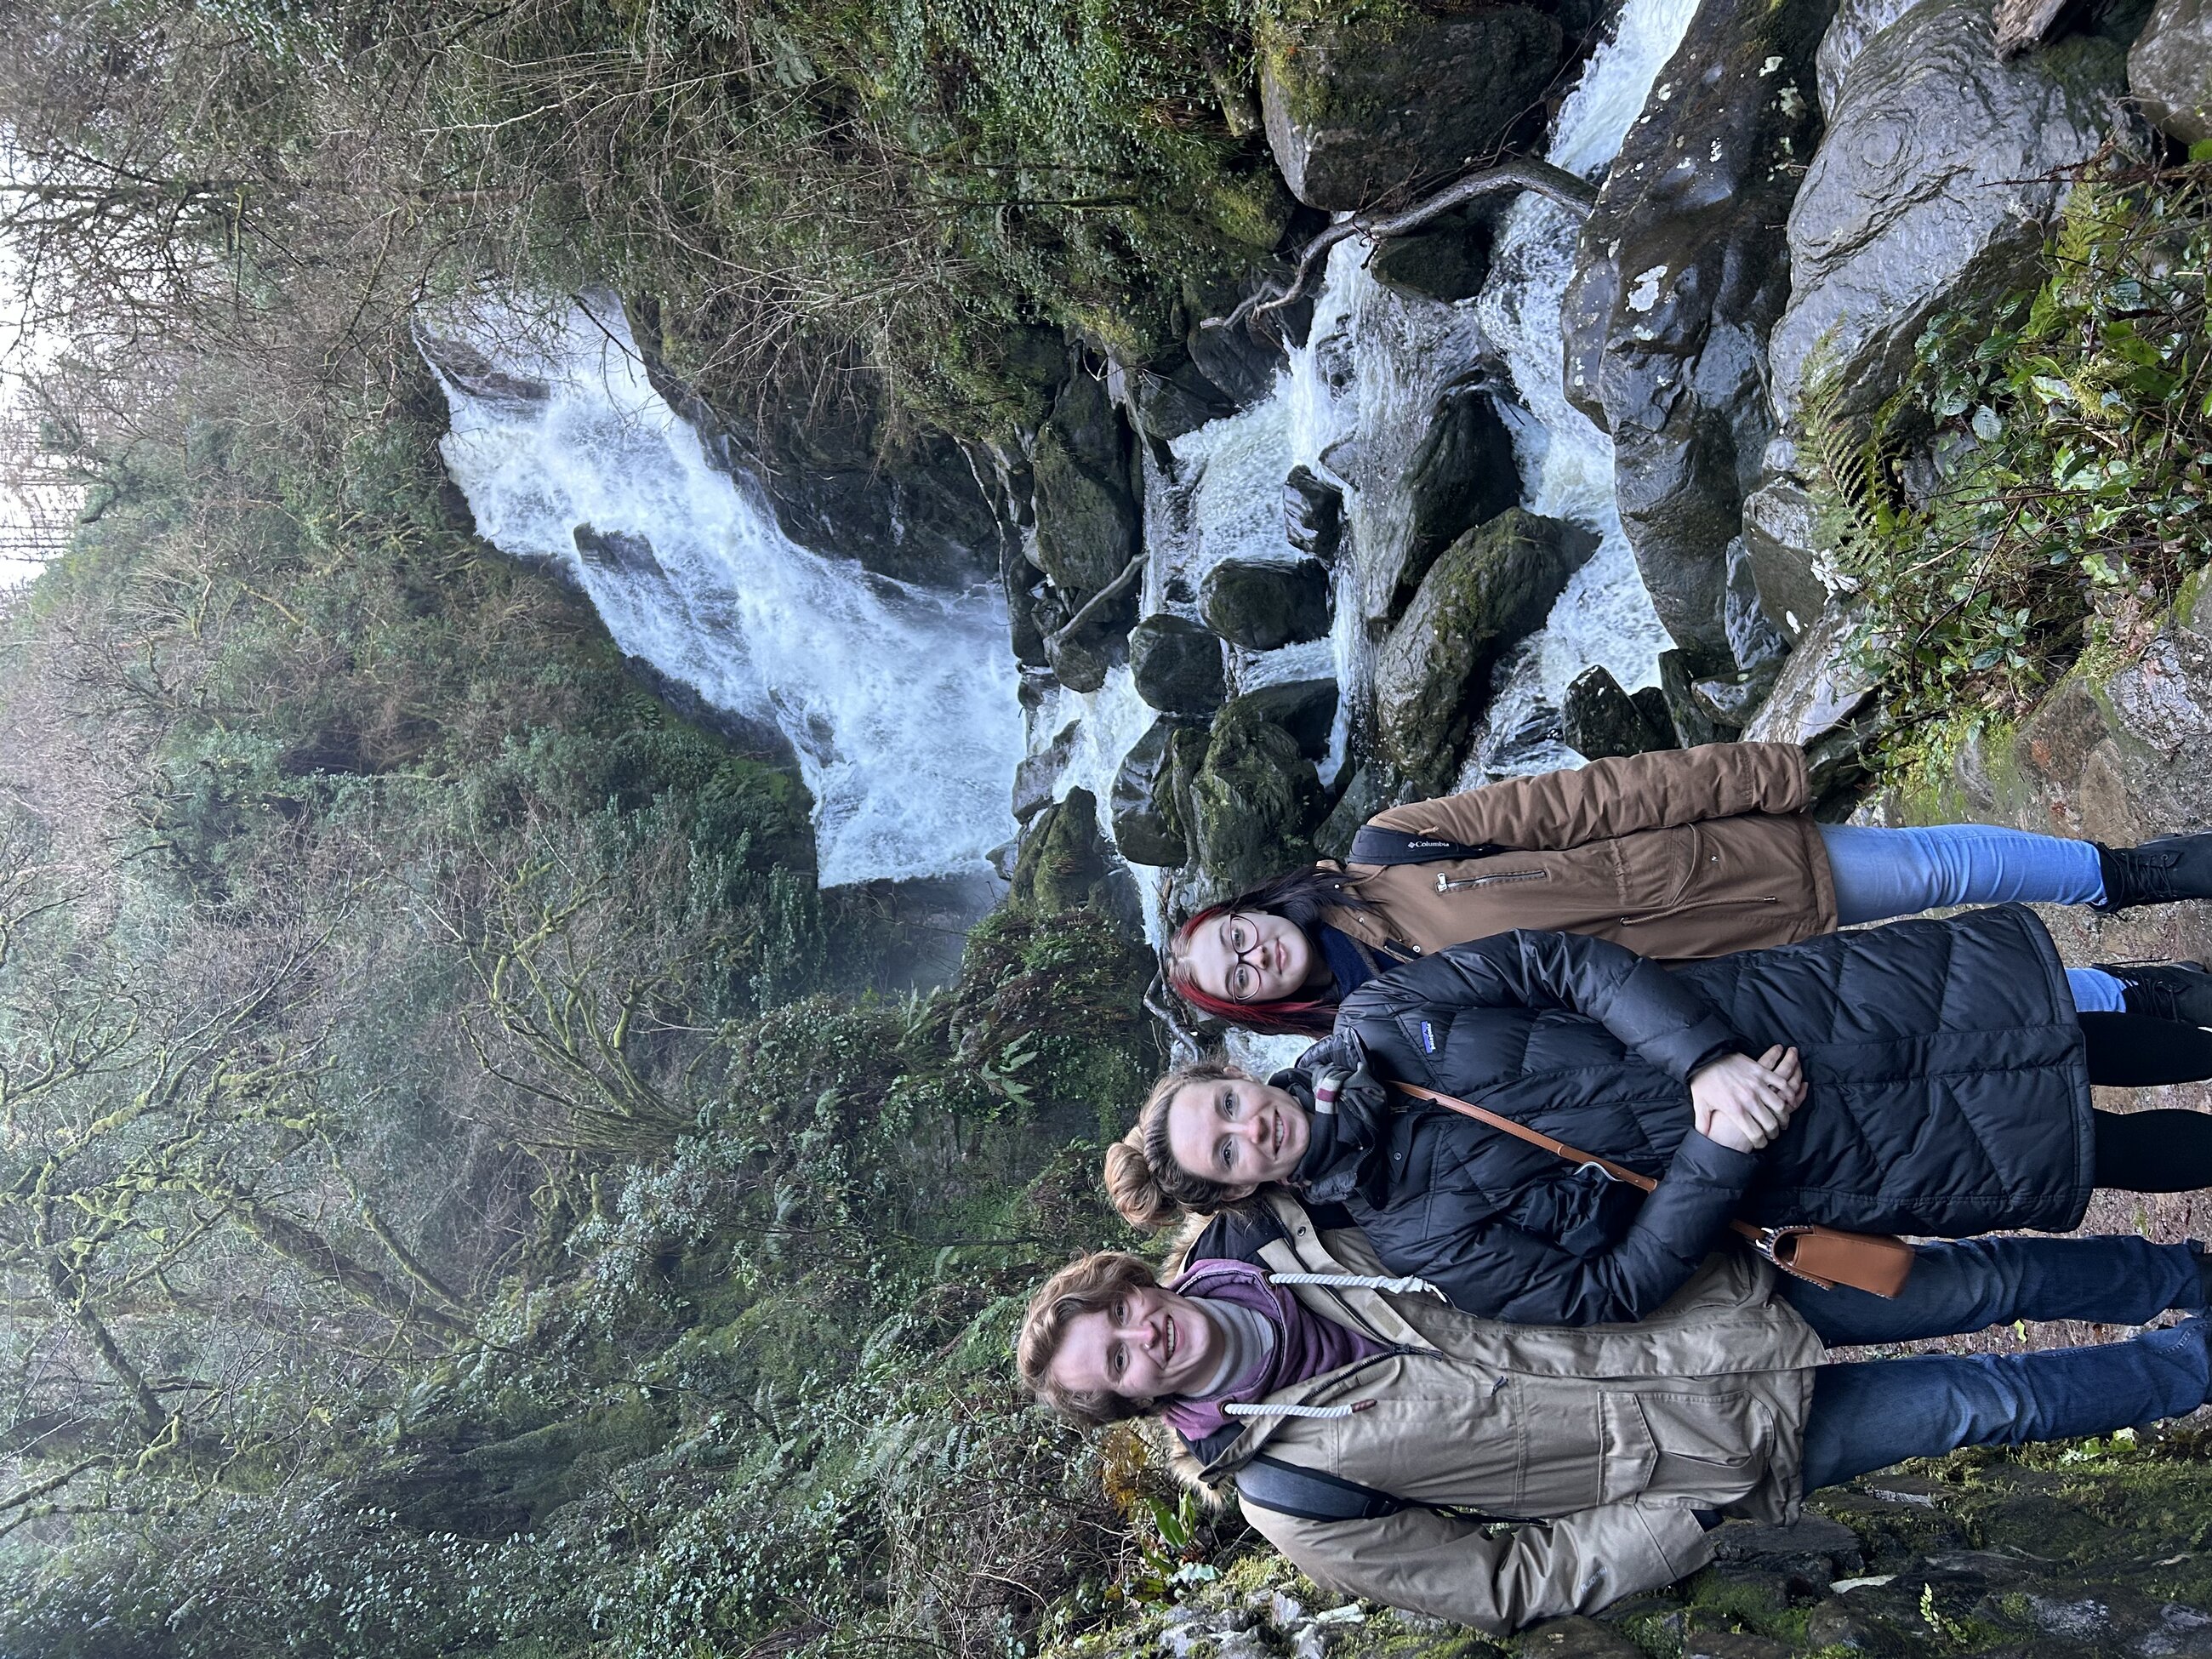 Some of us at Torc Waterfall 